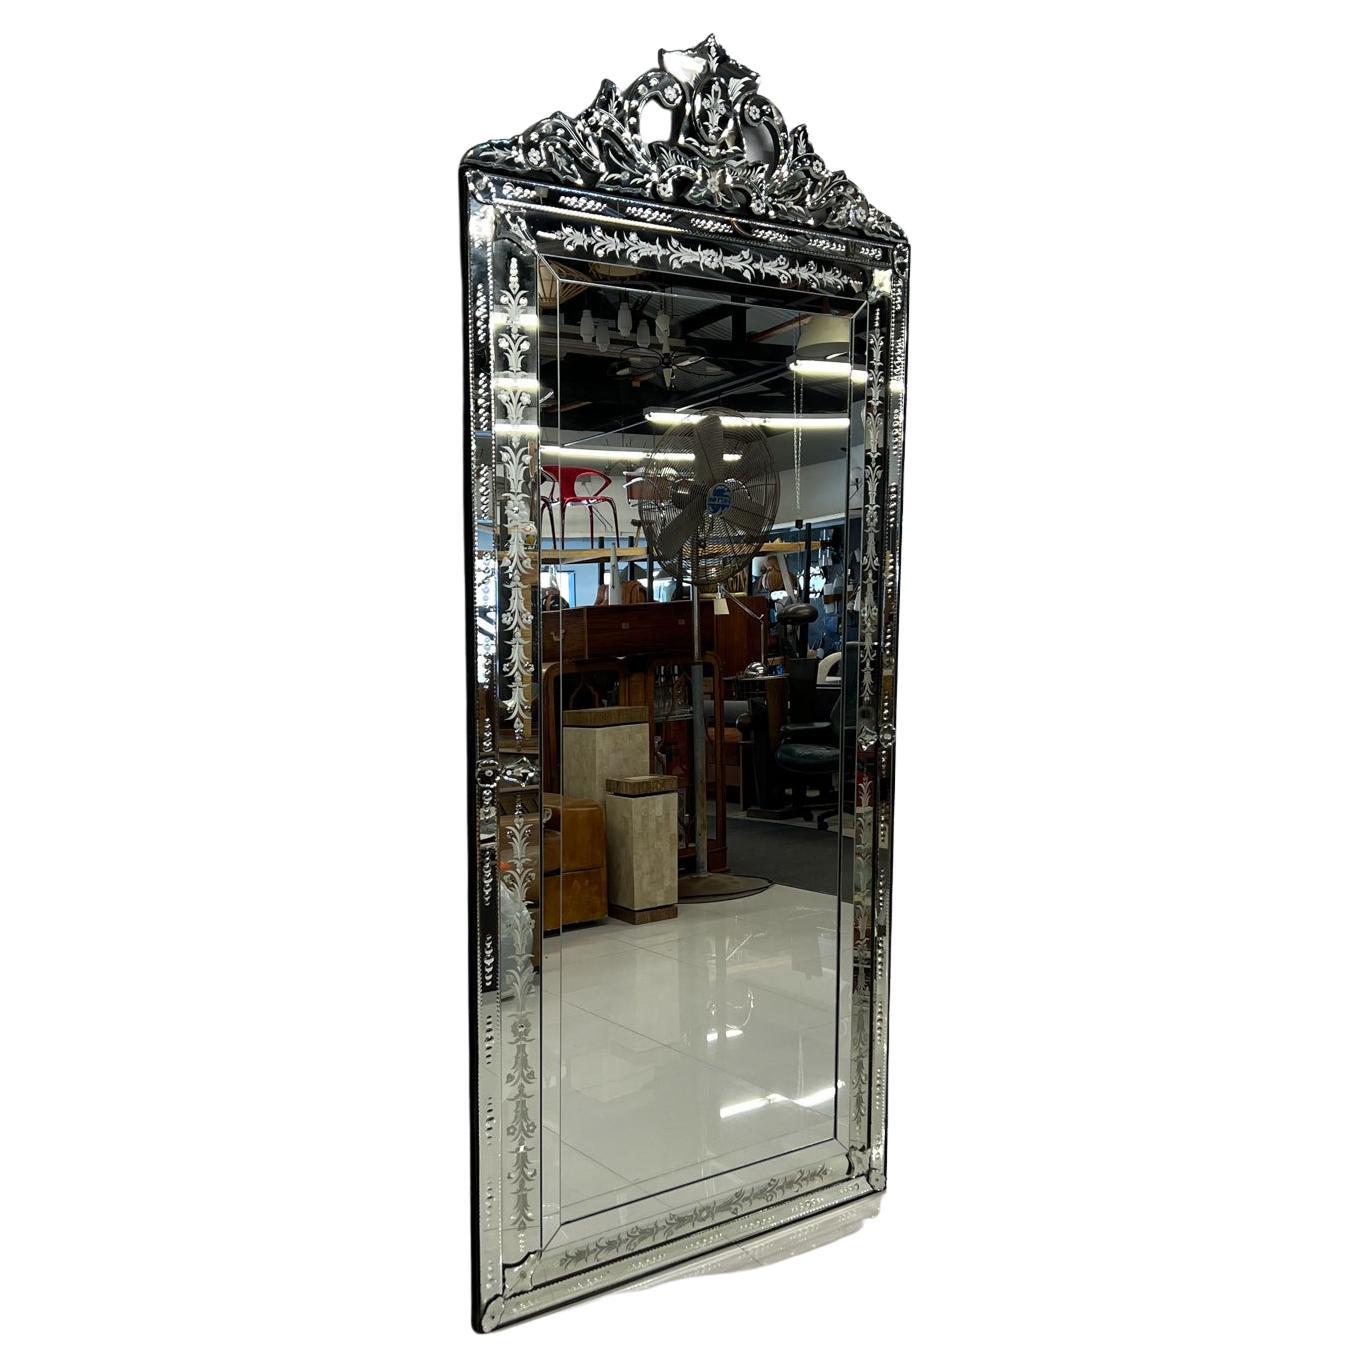 Handcrafted Venetian full-length floor mirror extravagant etched crystal glass
Hand polished 
Measures: 90.5 tall x 38.75 width x 1.75 depth
Unrestored, preowned original vintage condition.
See images we have provided.
Delivery to LA OC Palm